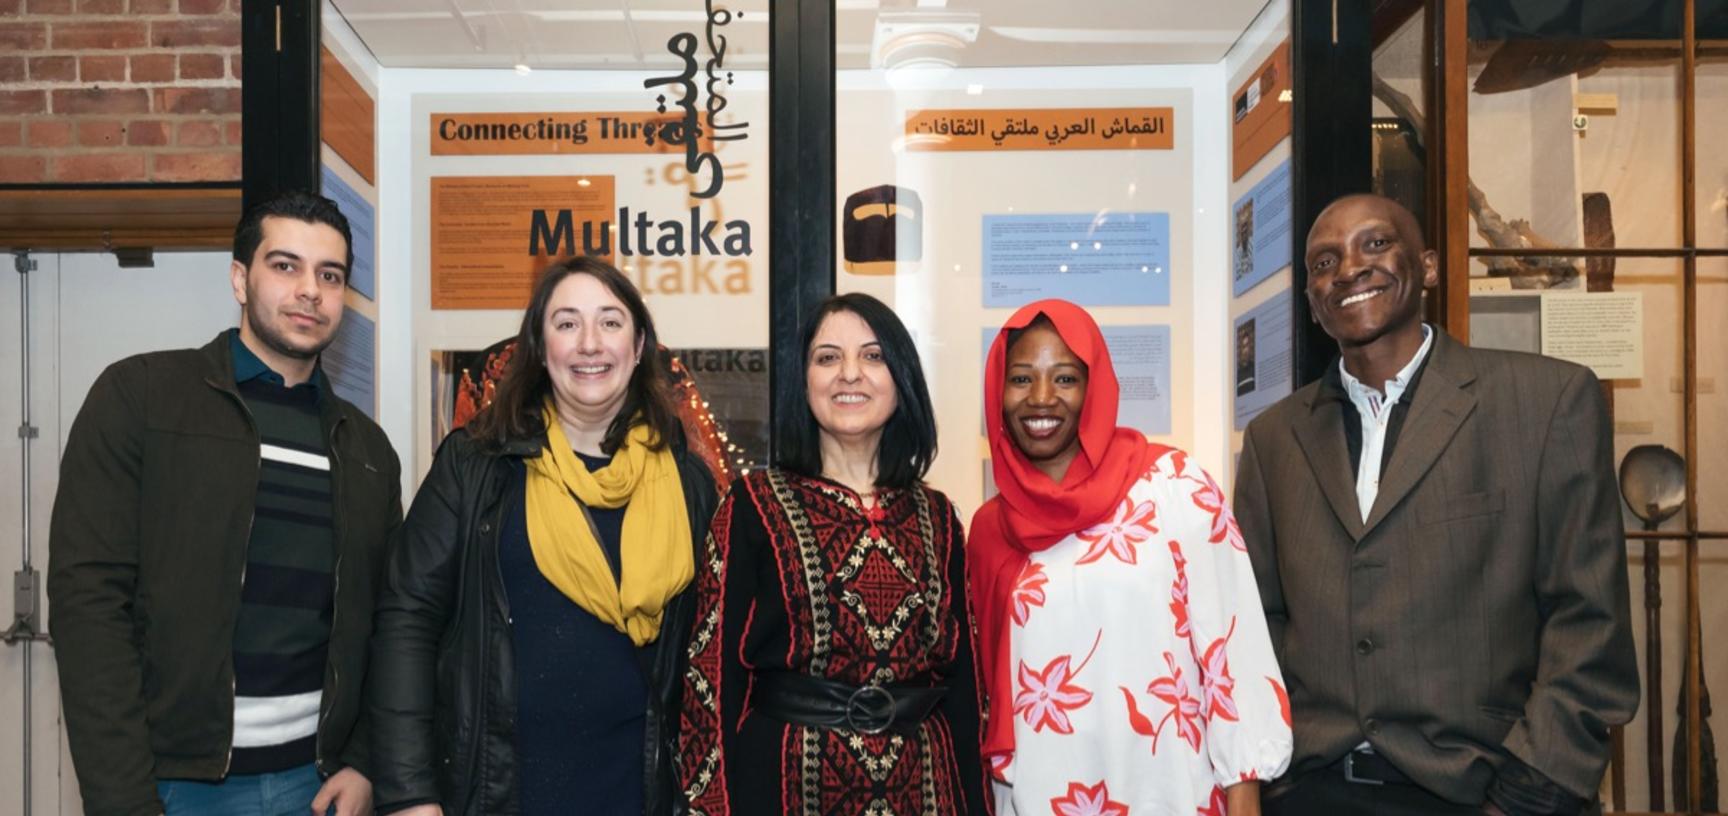 Multaka-Oxford volunteers and co-curators of the ‘Connecting Threads’ exhibition pictured in front of the display case.